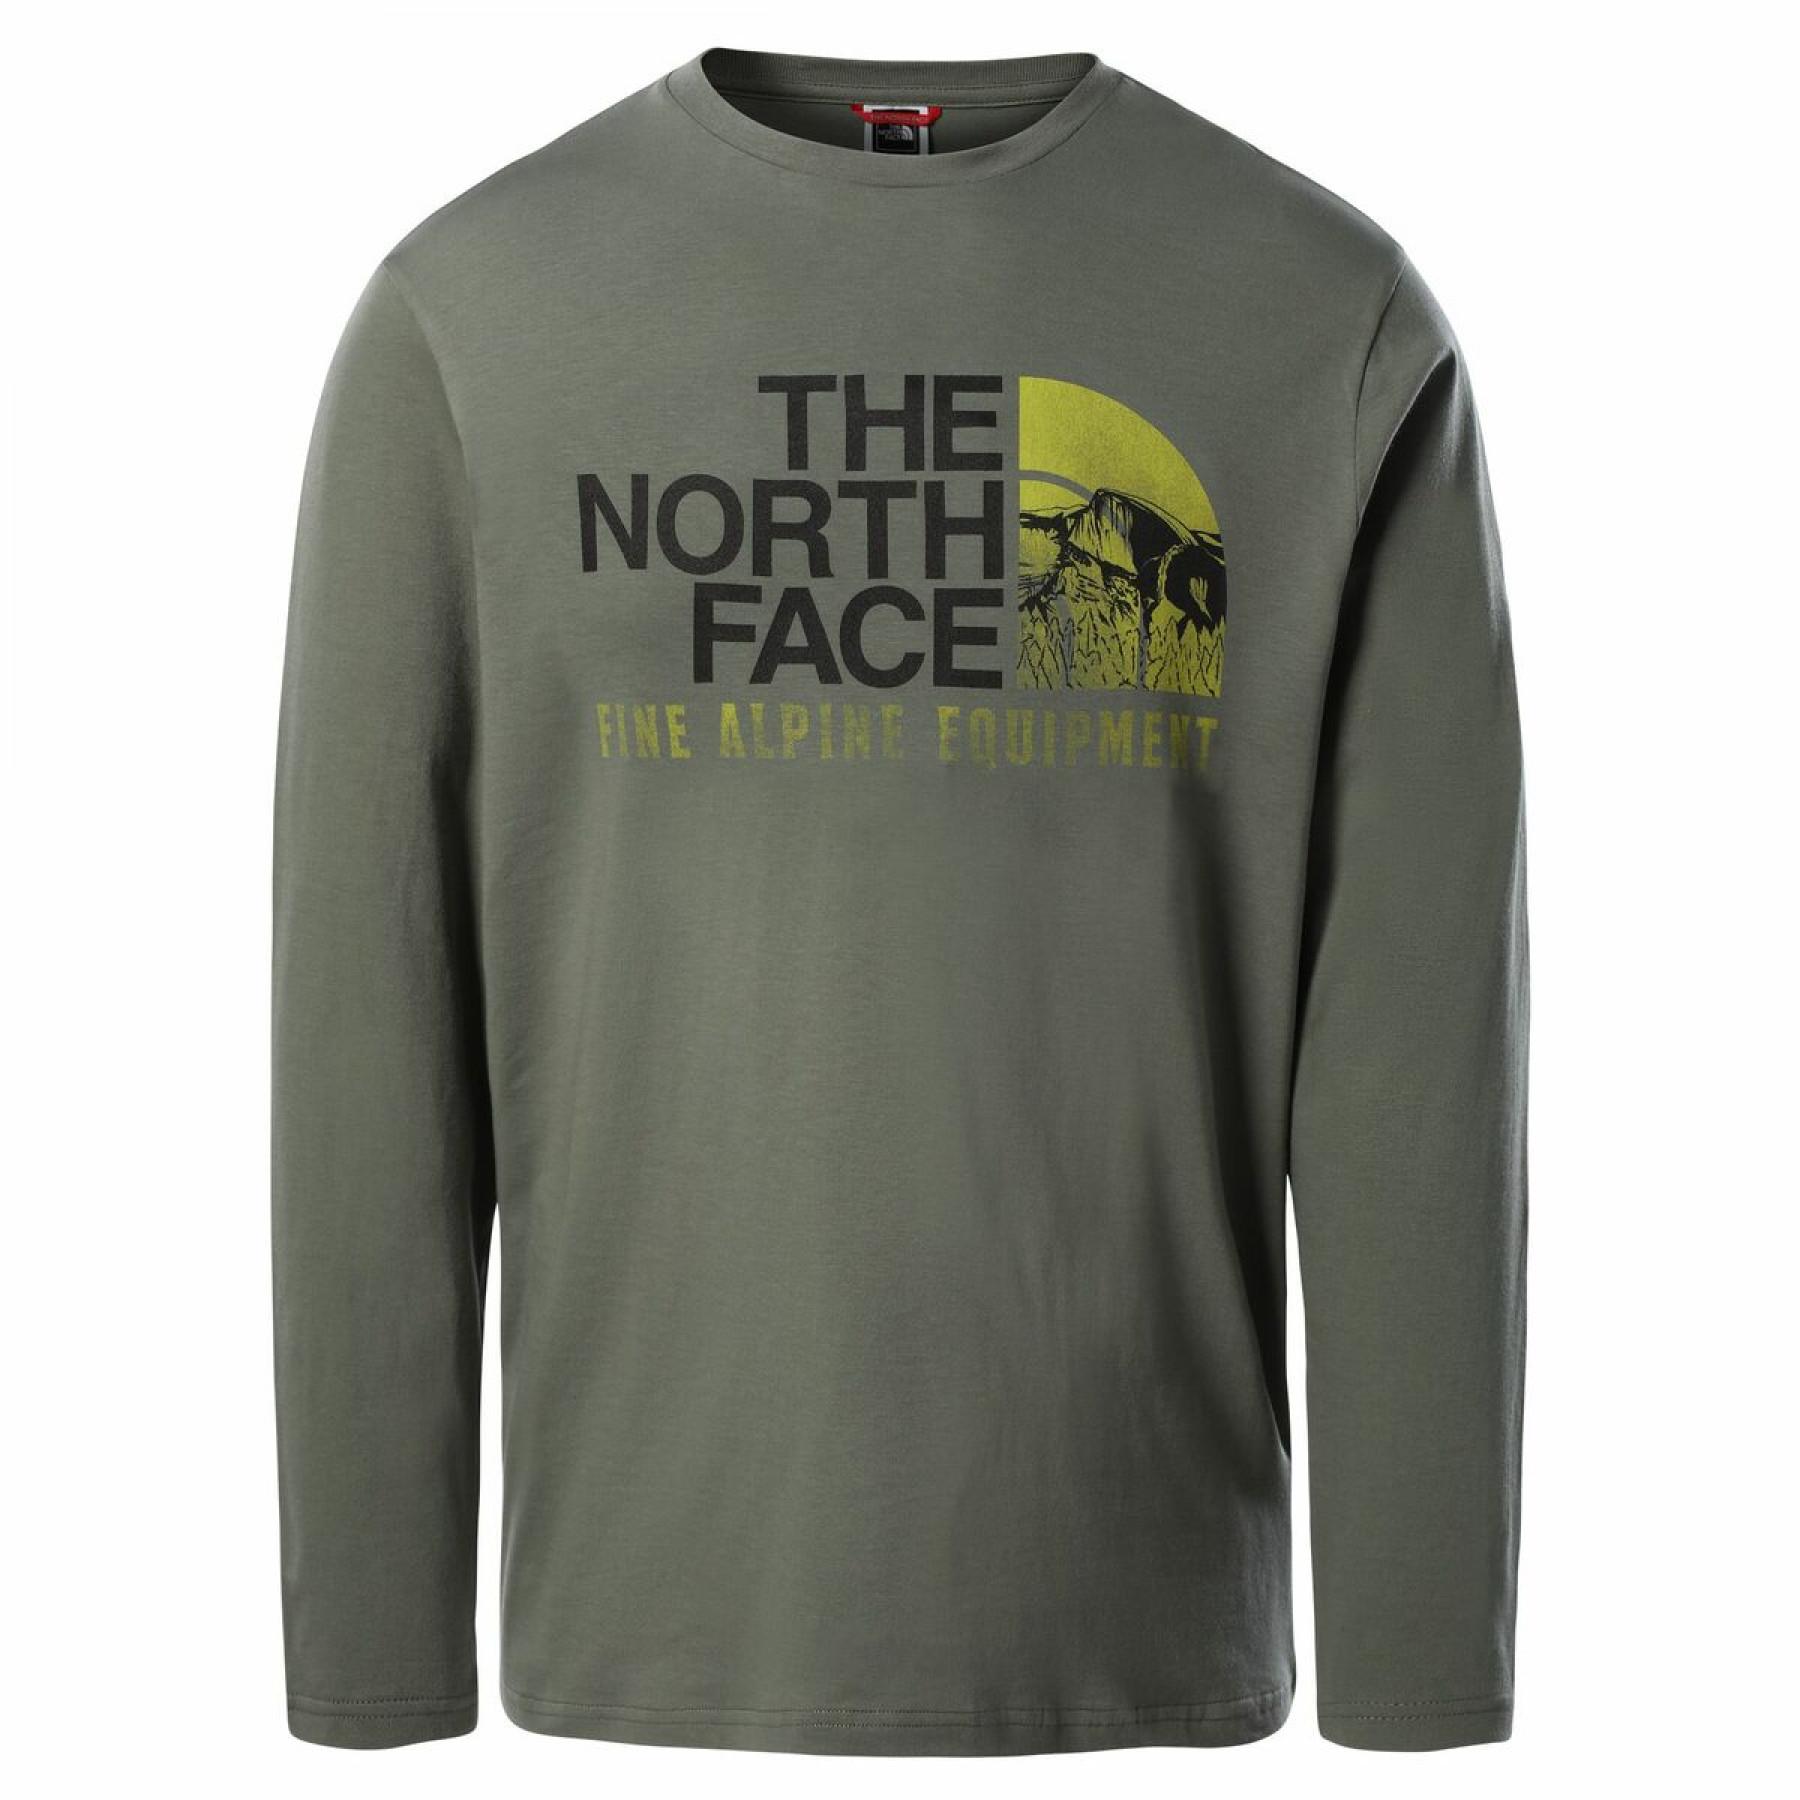 Long sleeve T-shirt The North Face Image Ideals